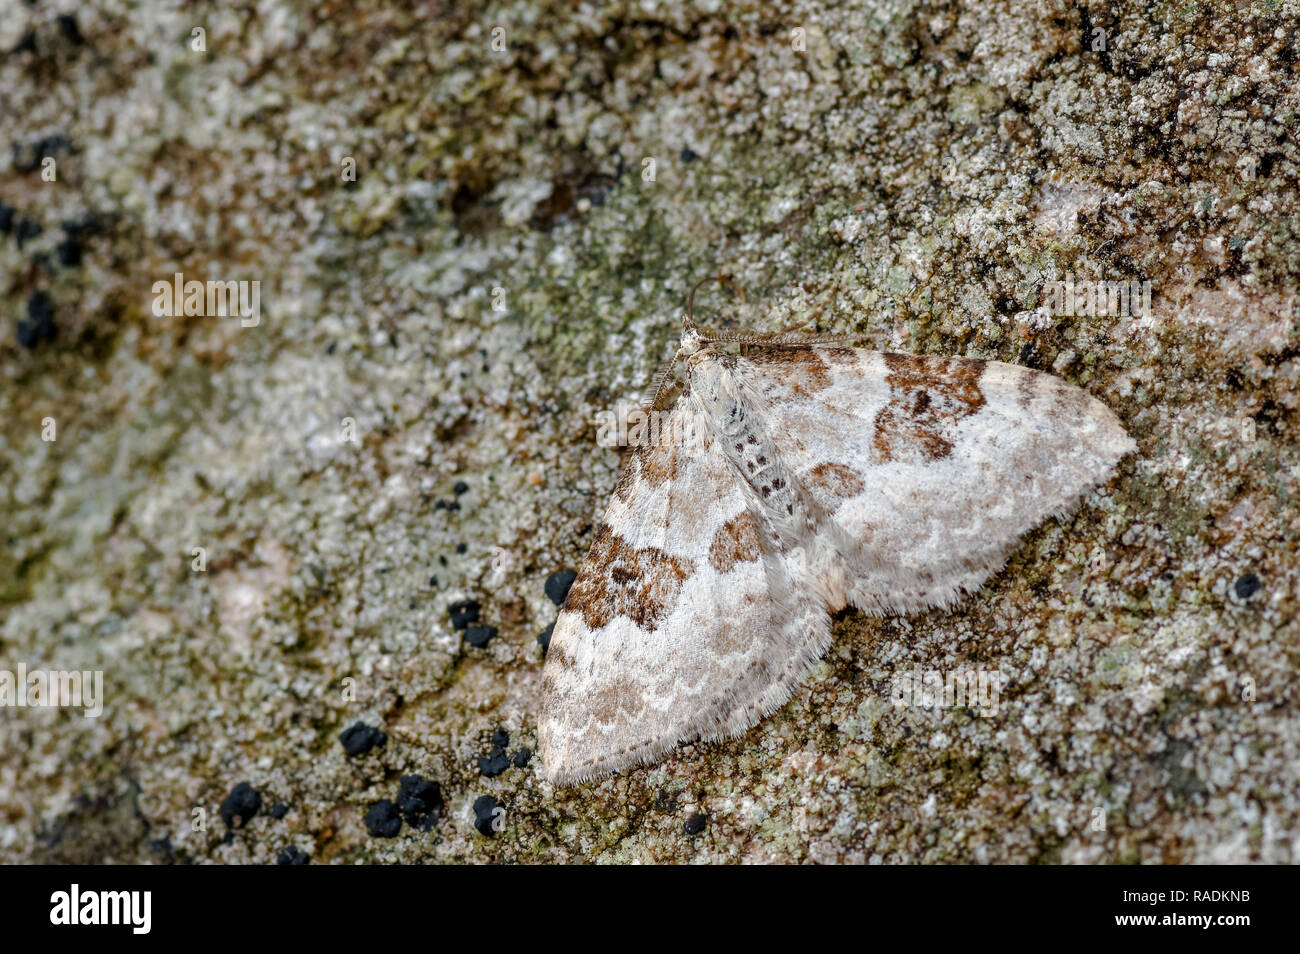 Silver-ground Carpet Xanthorhoe montanata, a geometrid moth known as a geometer moths (loopers) due to the larvae inching along in a looping motion. Stock Photo